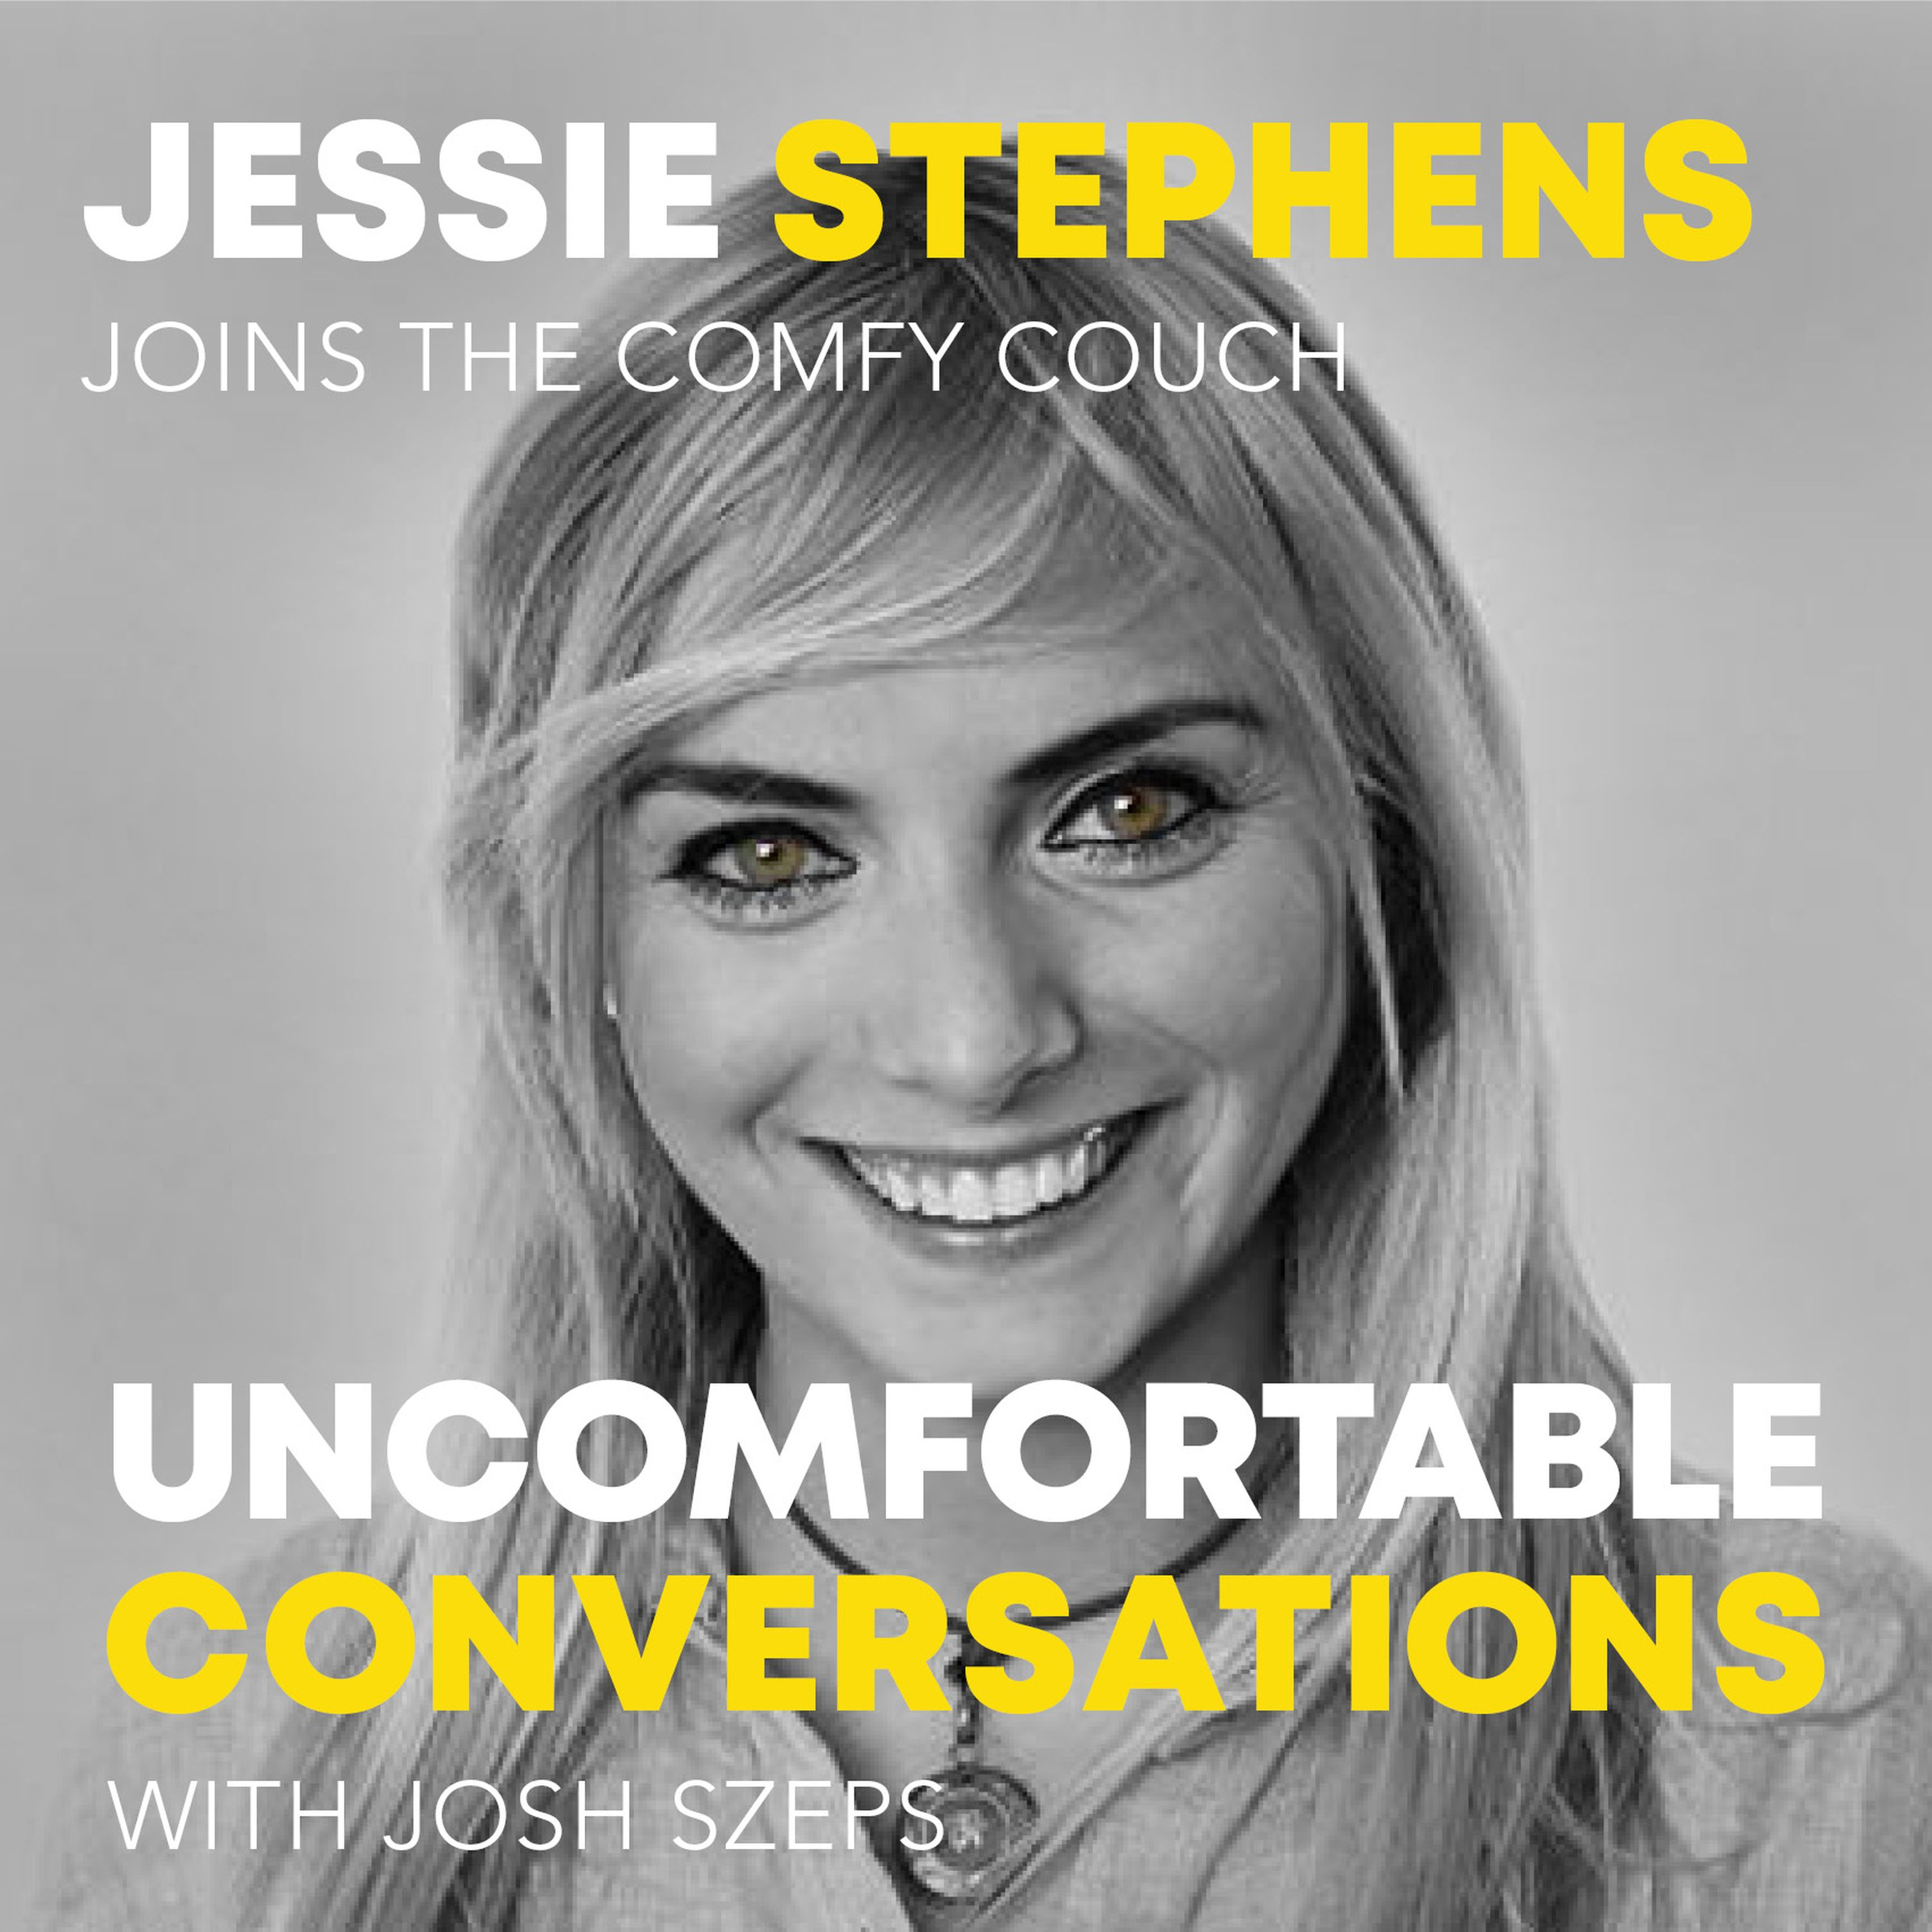 Jessie Stephens joins the Comfy Couch